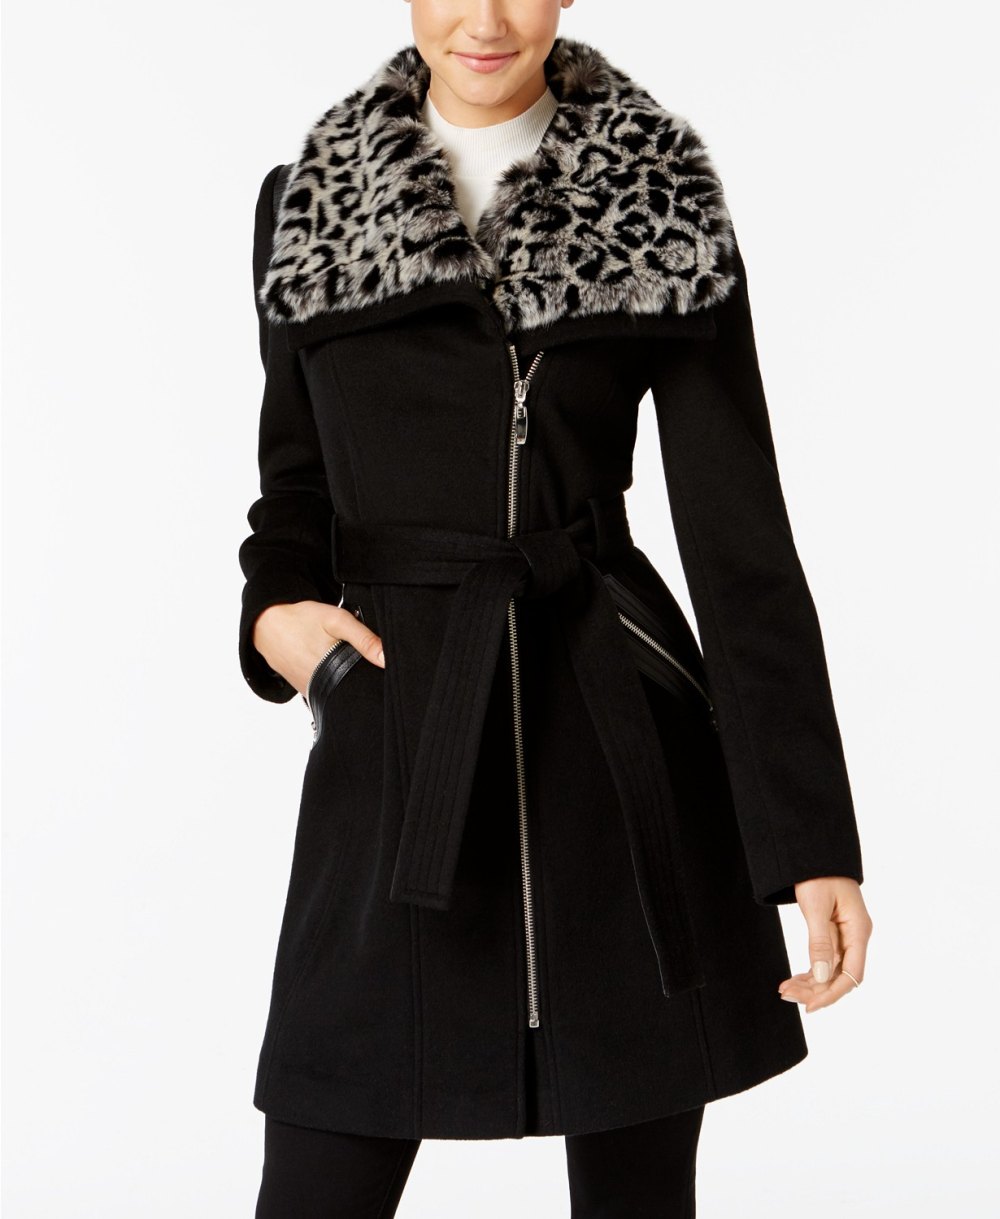 Our Favorite Trendy Coat Is More Than Half Off at Macy’s | Us Weekly